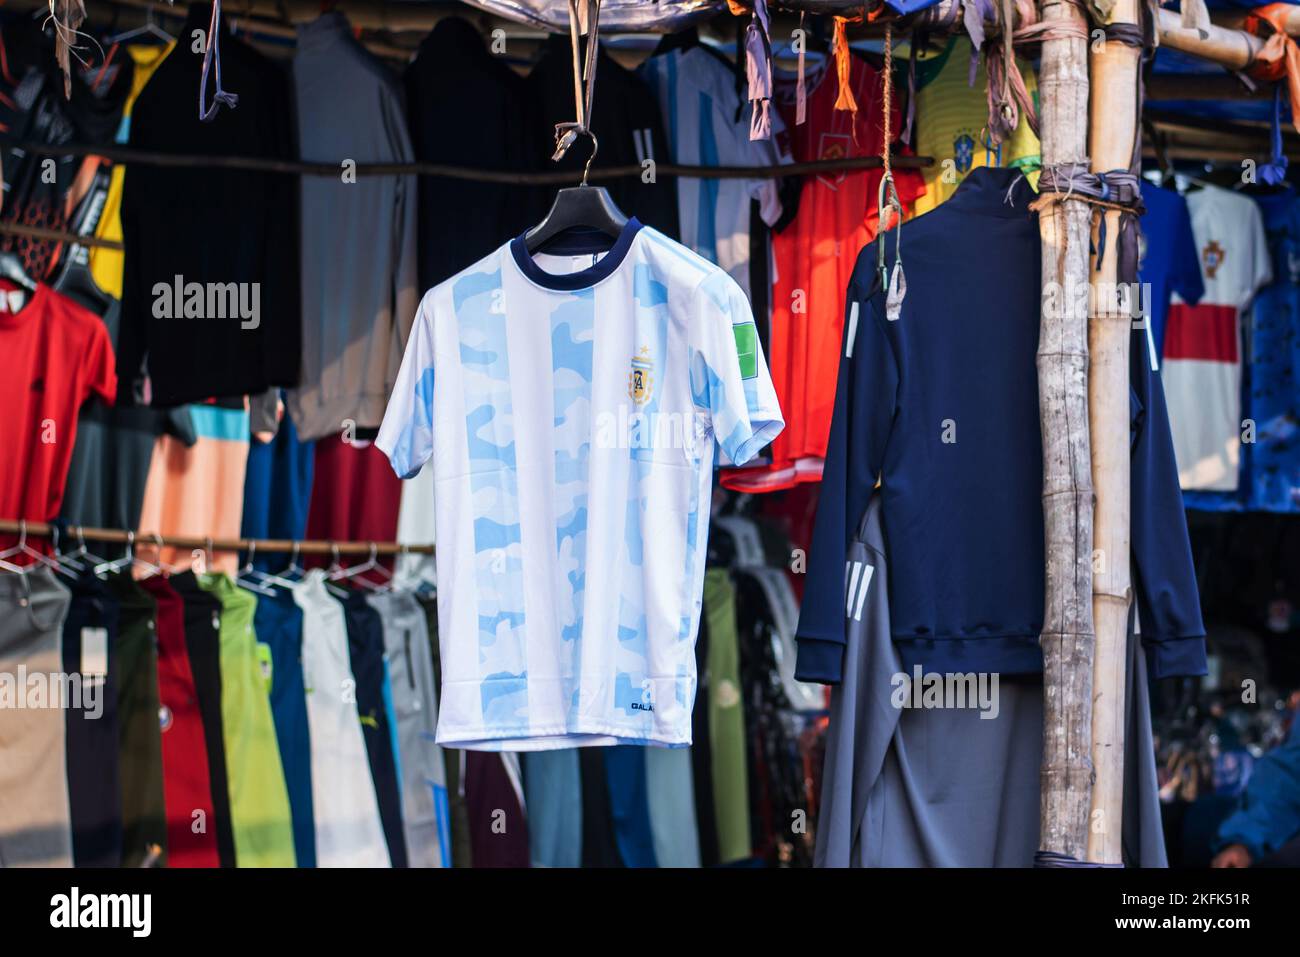 Argentina soccer jersey is hanging in a store Stock Photo